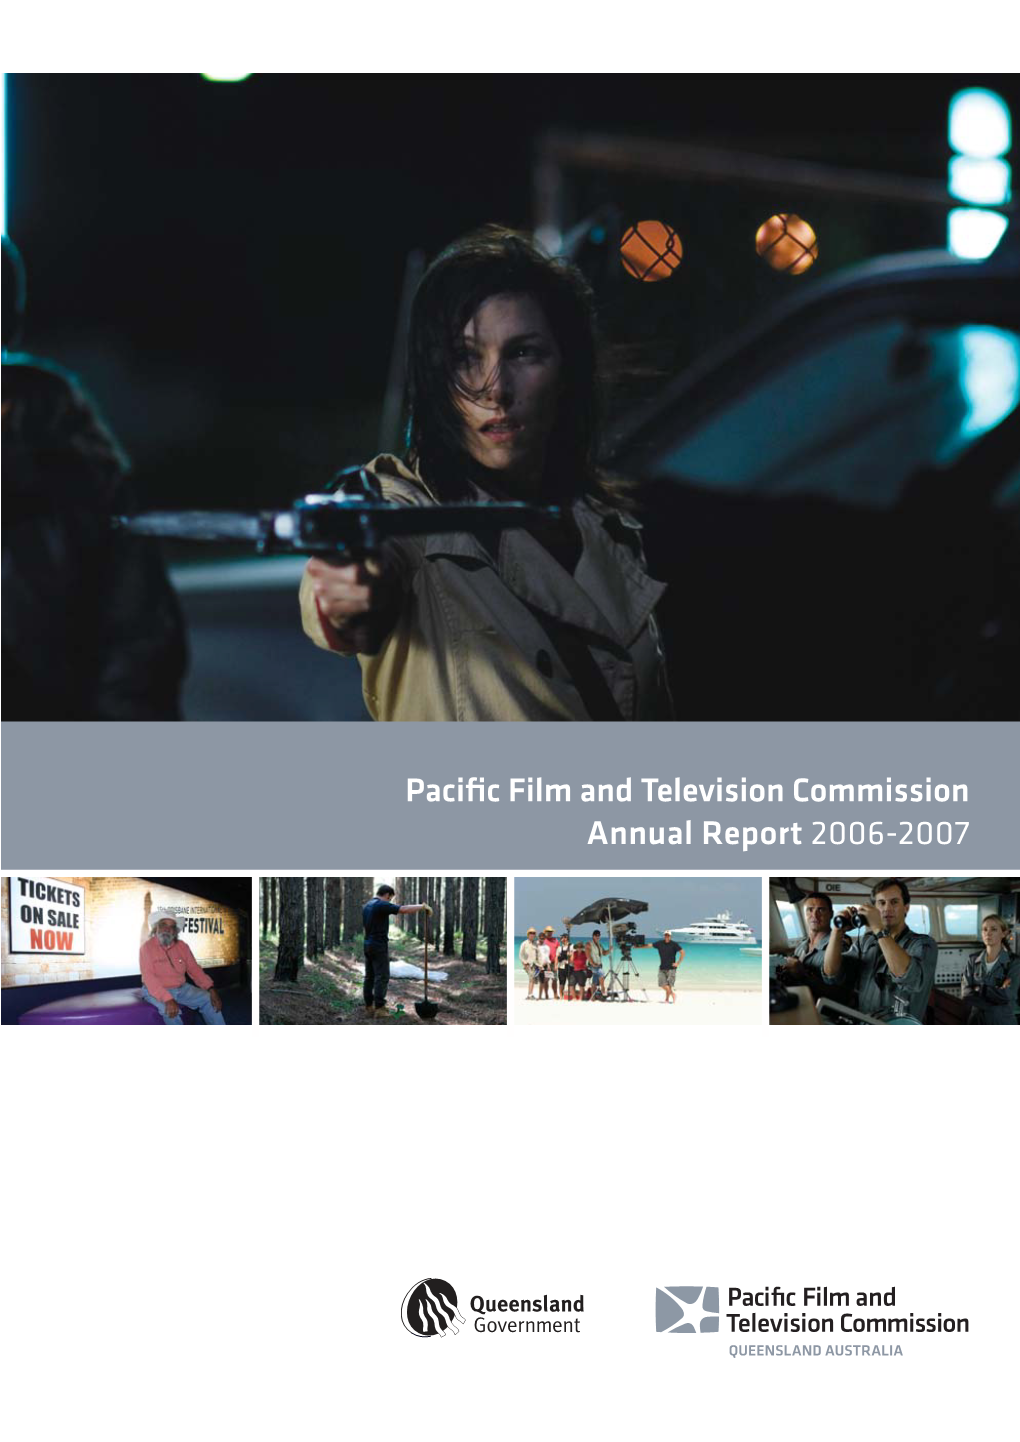 Annual Report 2006-2007 Pacific Film and Television Commission